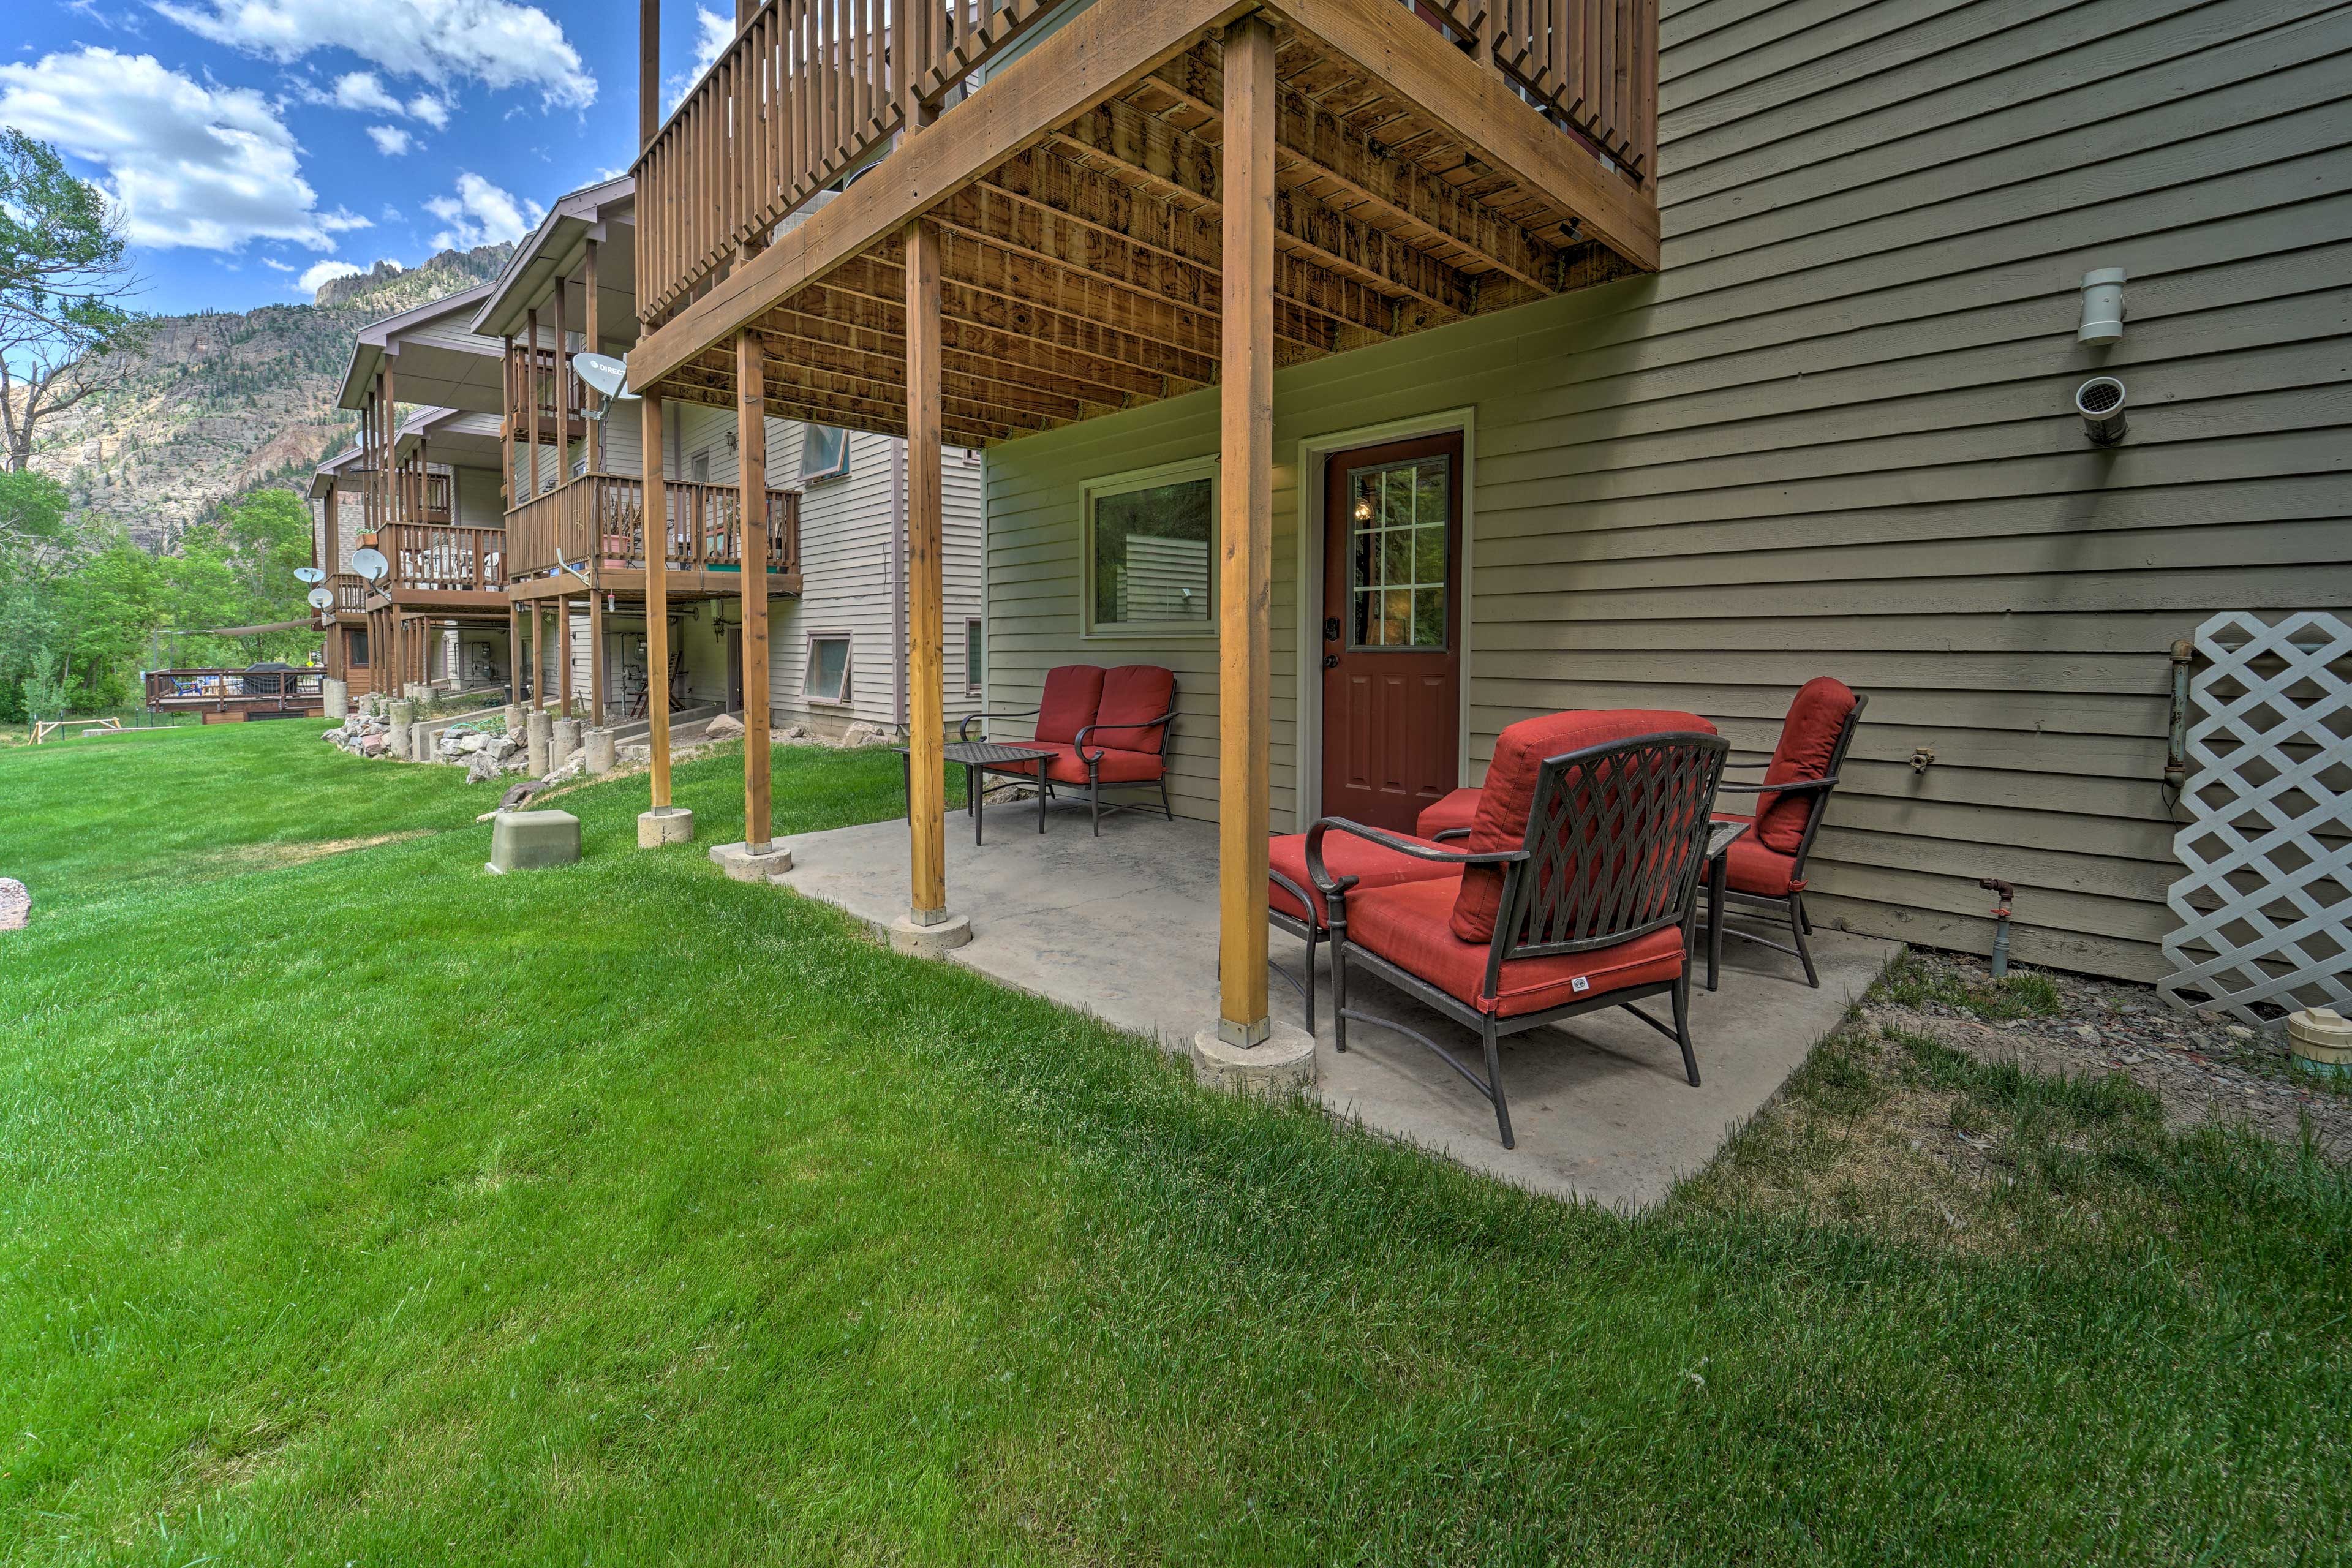 Townhome w/ Mtn Views: 1 Block to Downtown Ouray!